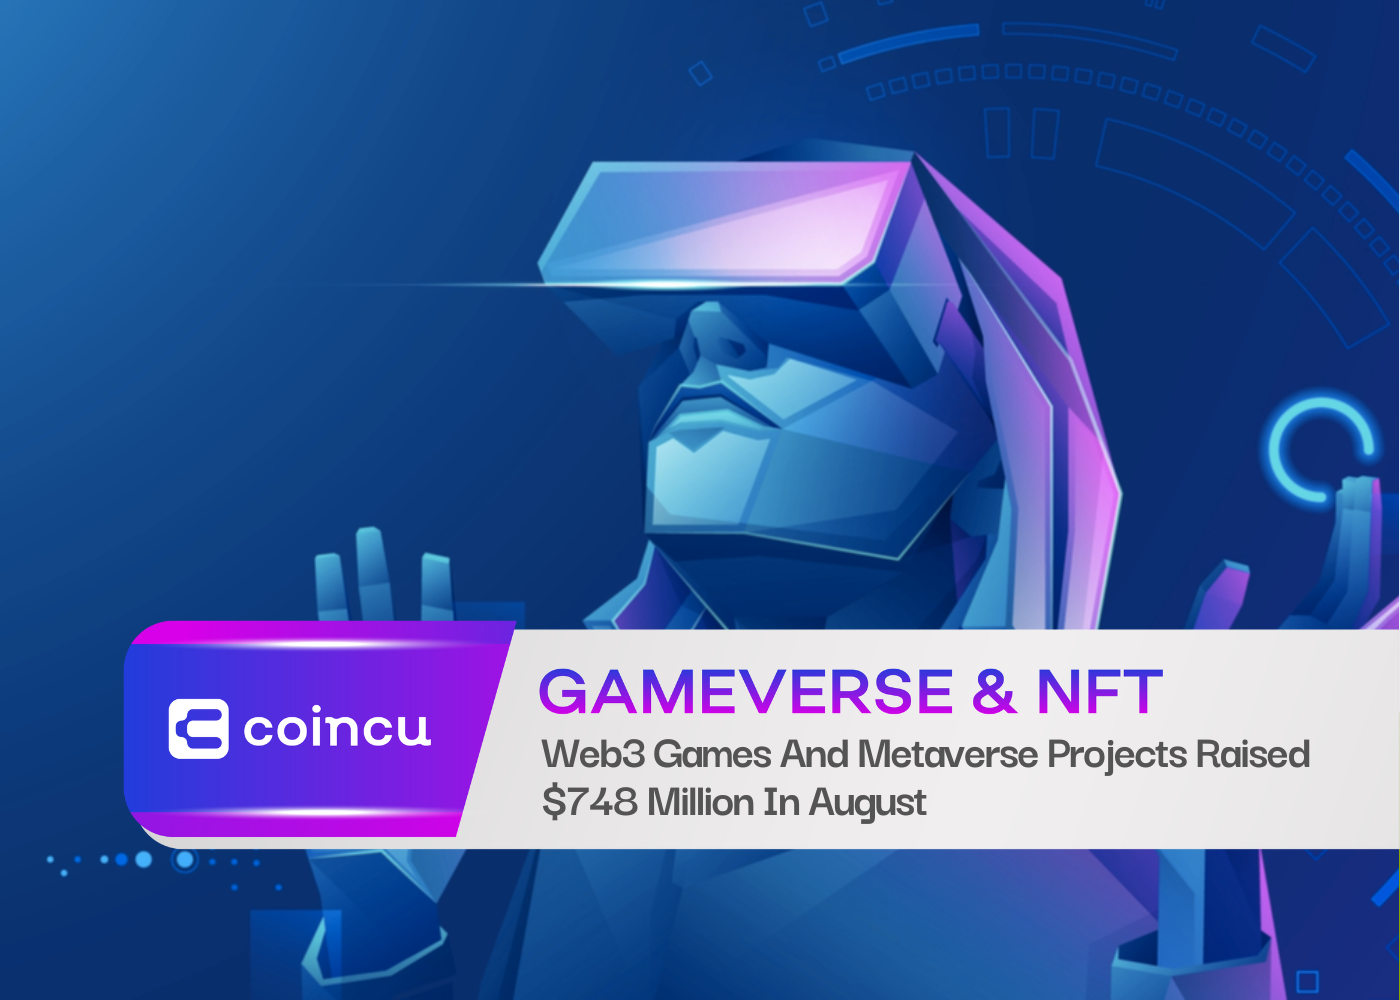 Web3 Games And Metaverse Projects Raised $748 Million In August